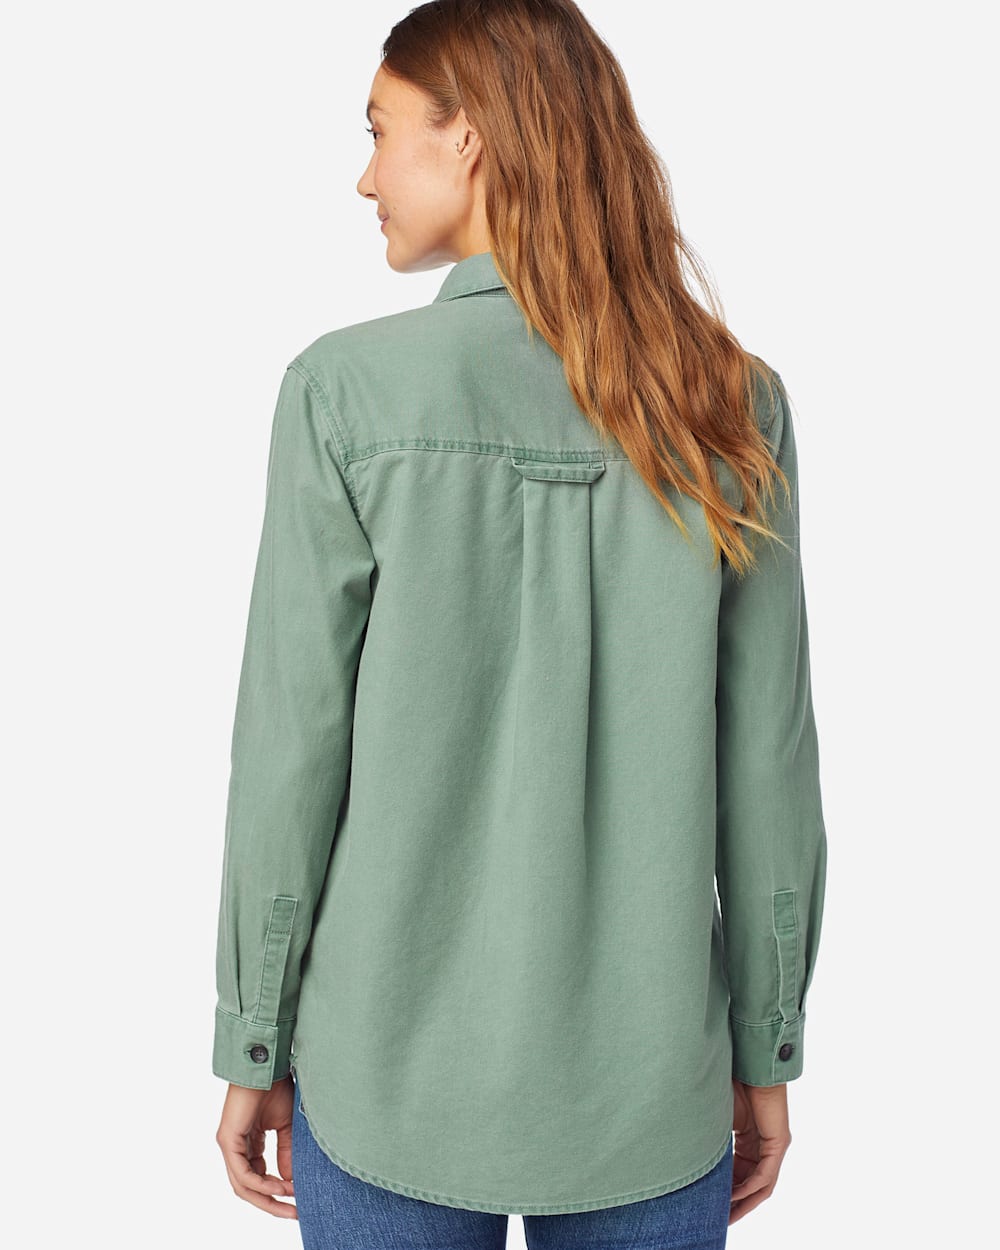 WOMEN'S BEACH SHACK SHIRT IN SPRUCE GREEN image number 3